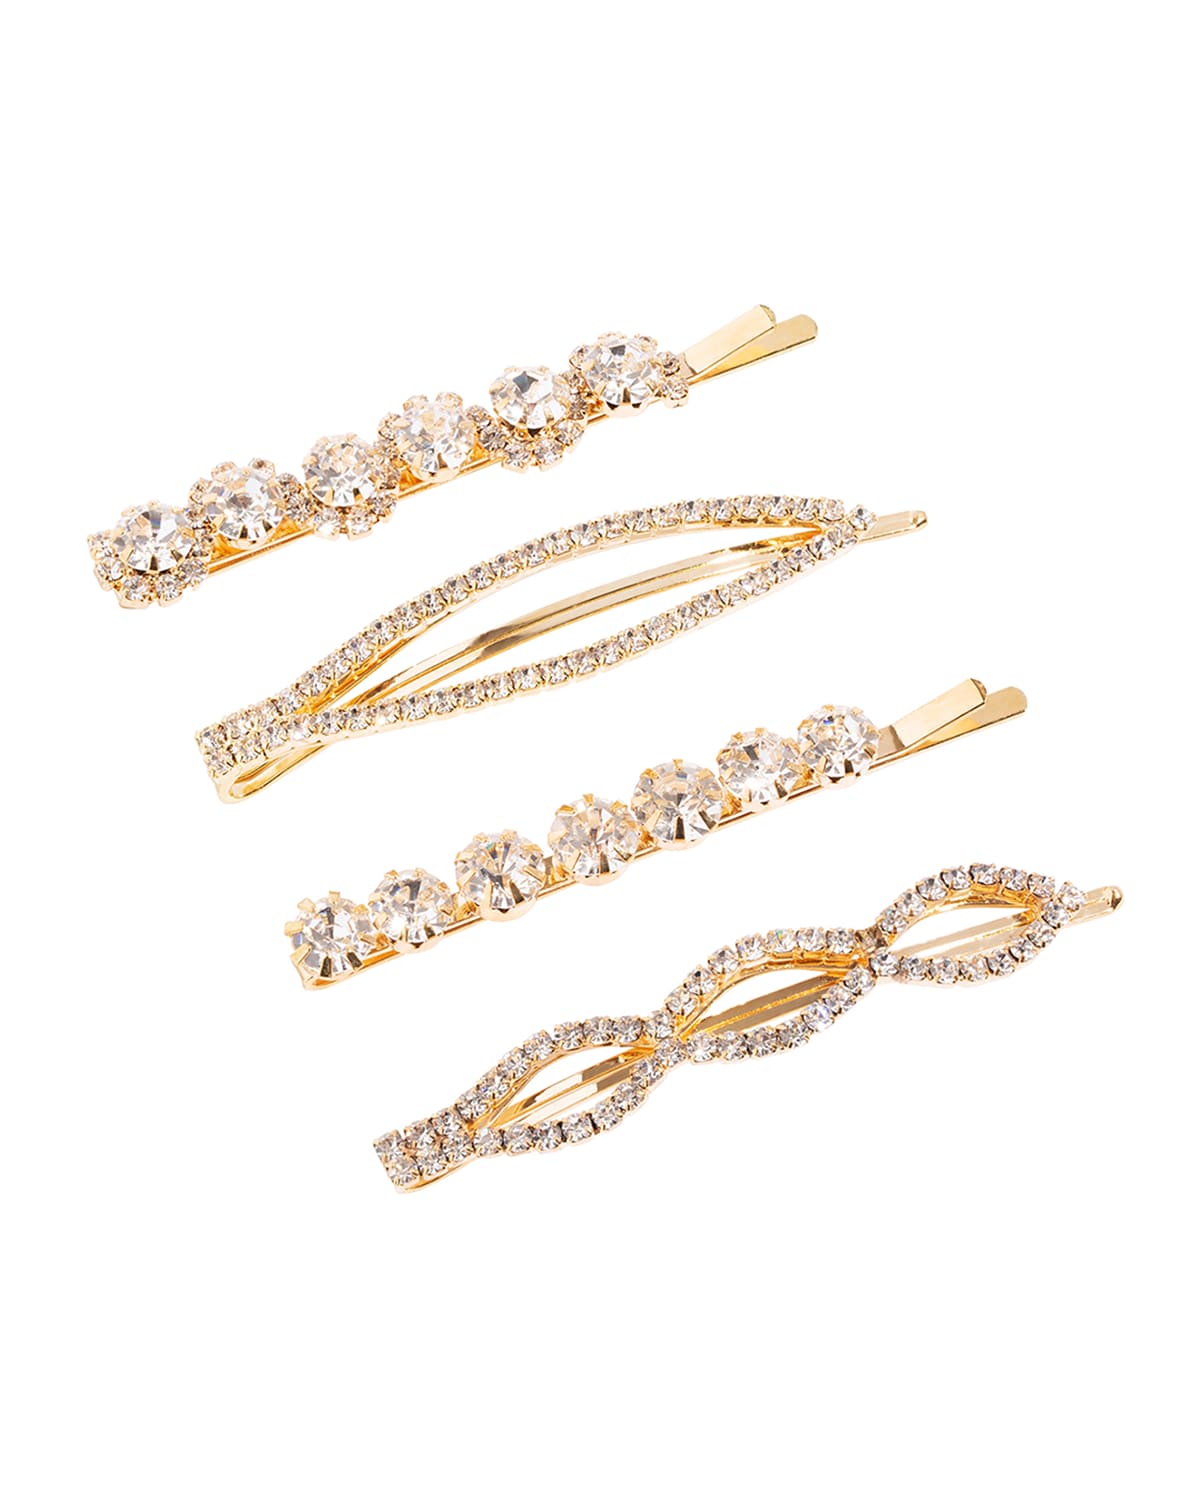 L Erickson Crystal Bobby Pins, Set Of 4 In Crystal / Gold